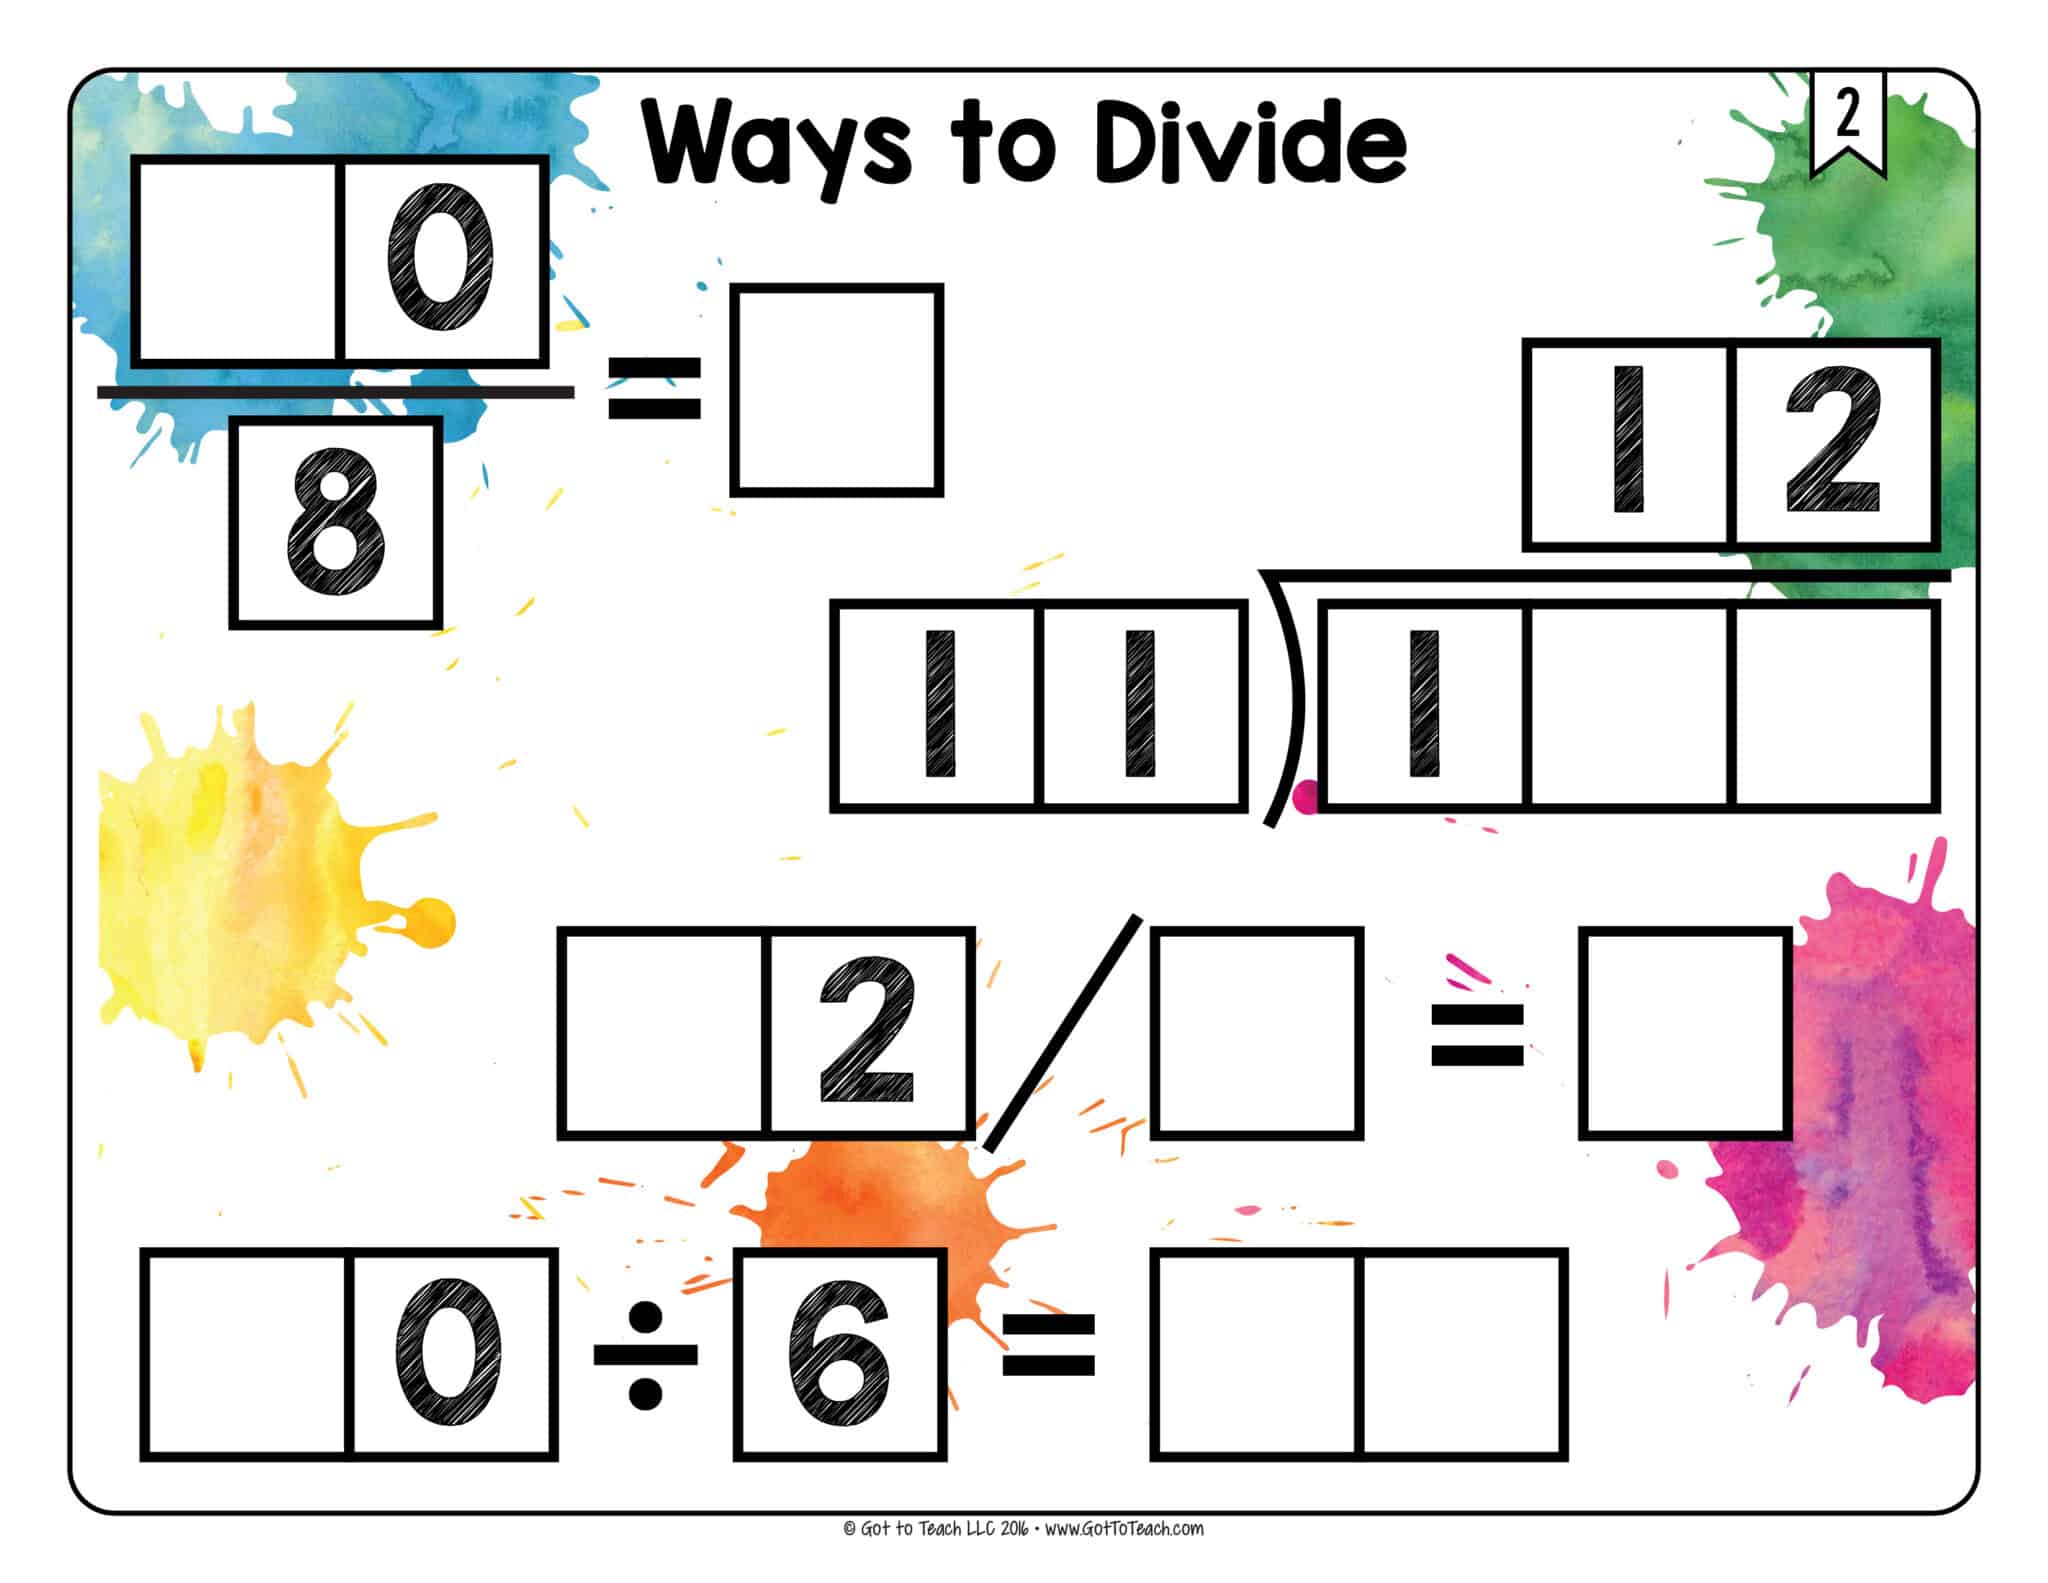 Ways to Divide